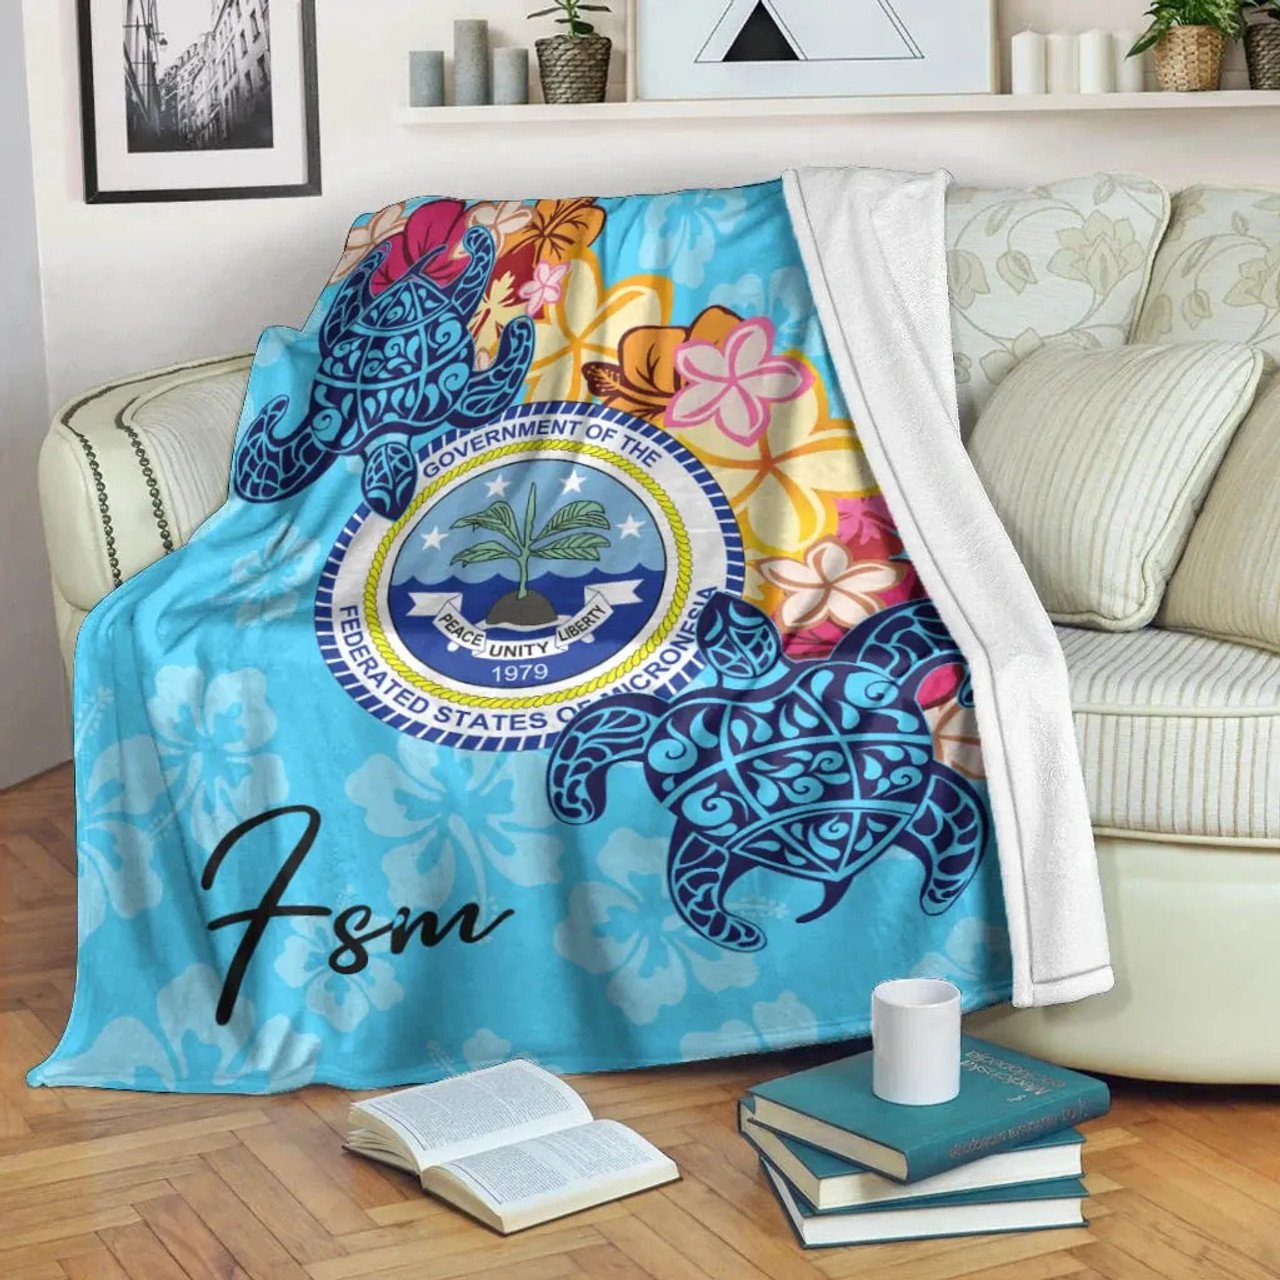 Federated States of Micronesia Premium Blanket - Tropical Style 1